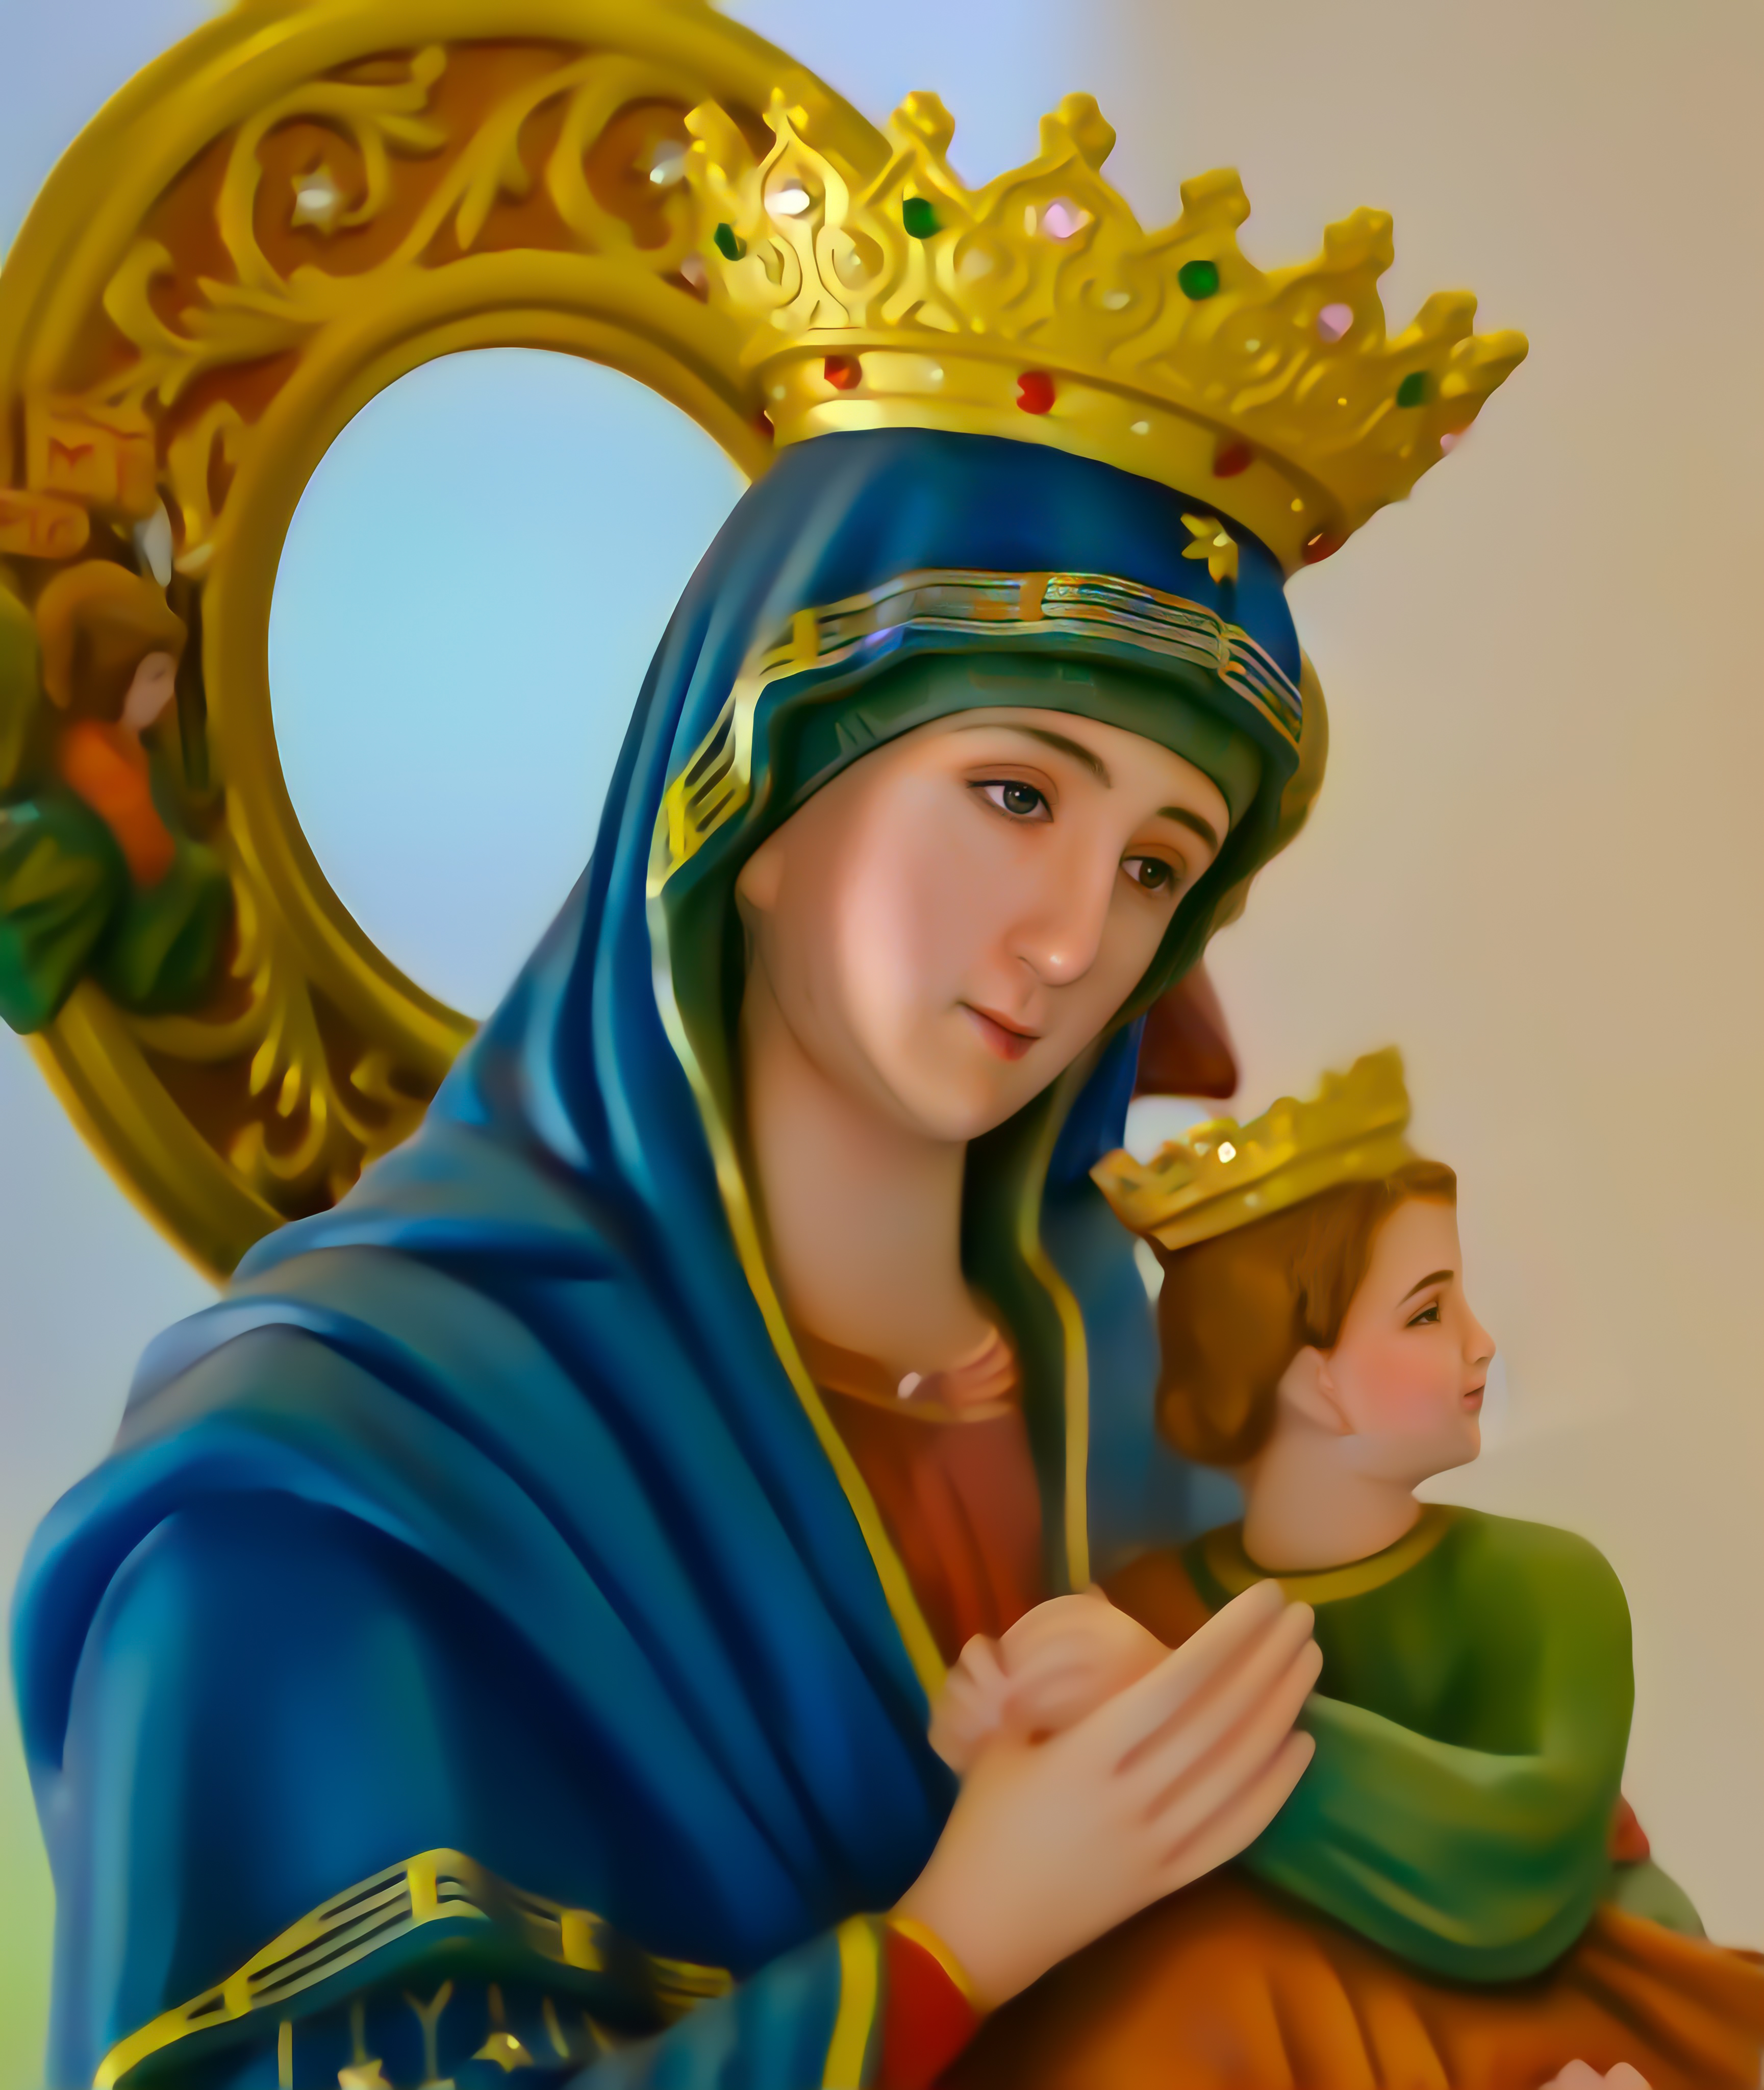 Virgin Mary Wallpaper 2020 APK for Android Download